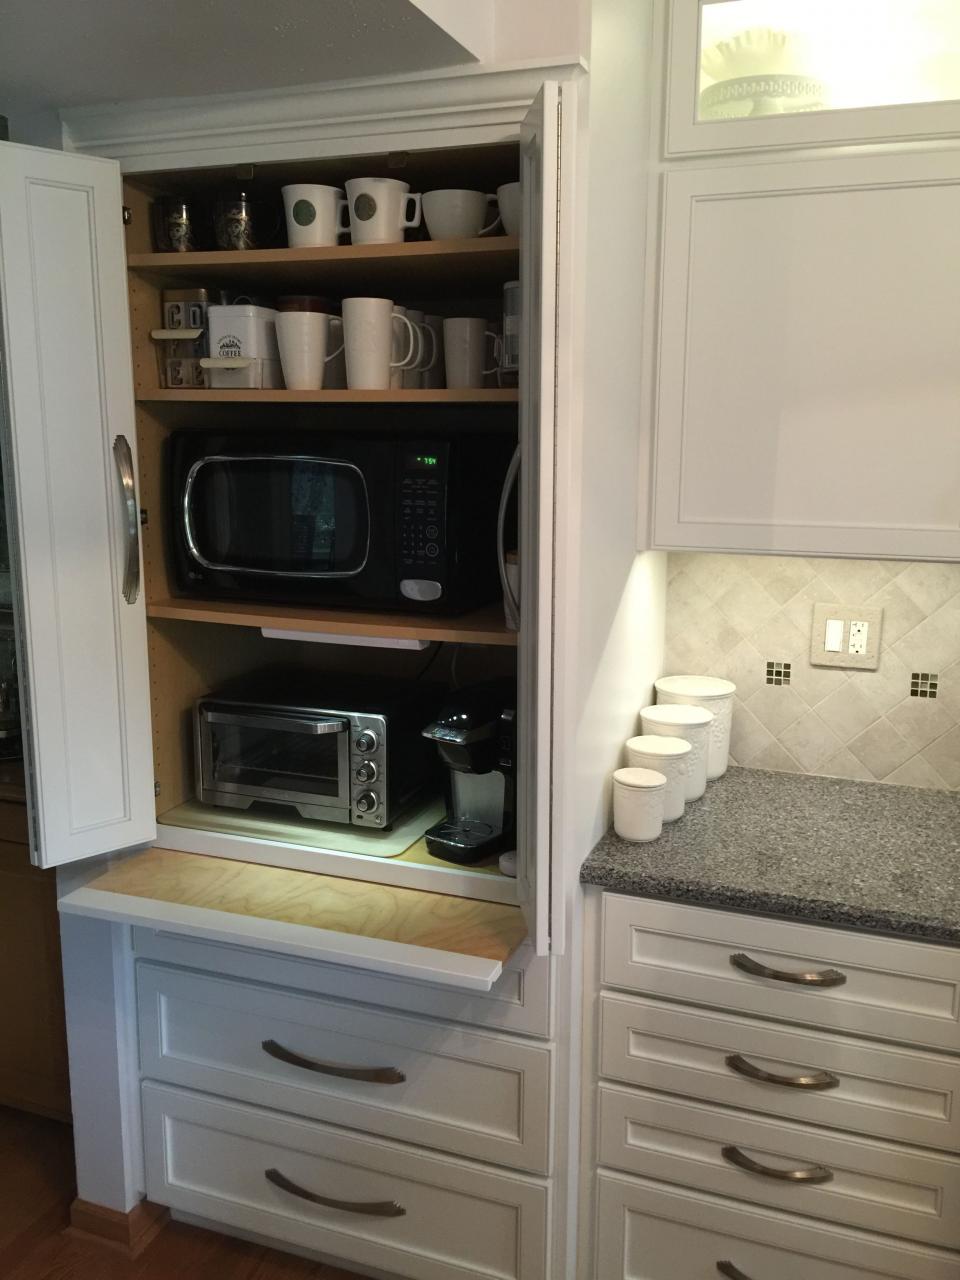 No counter clutter. Appliance Microwave, toaster oven, coffee